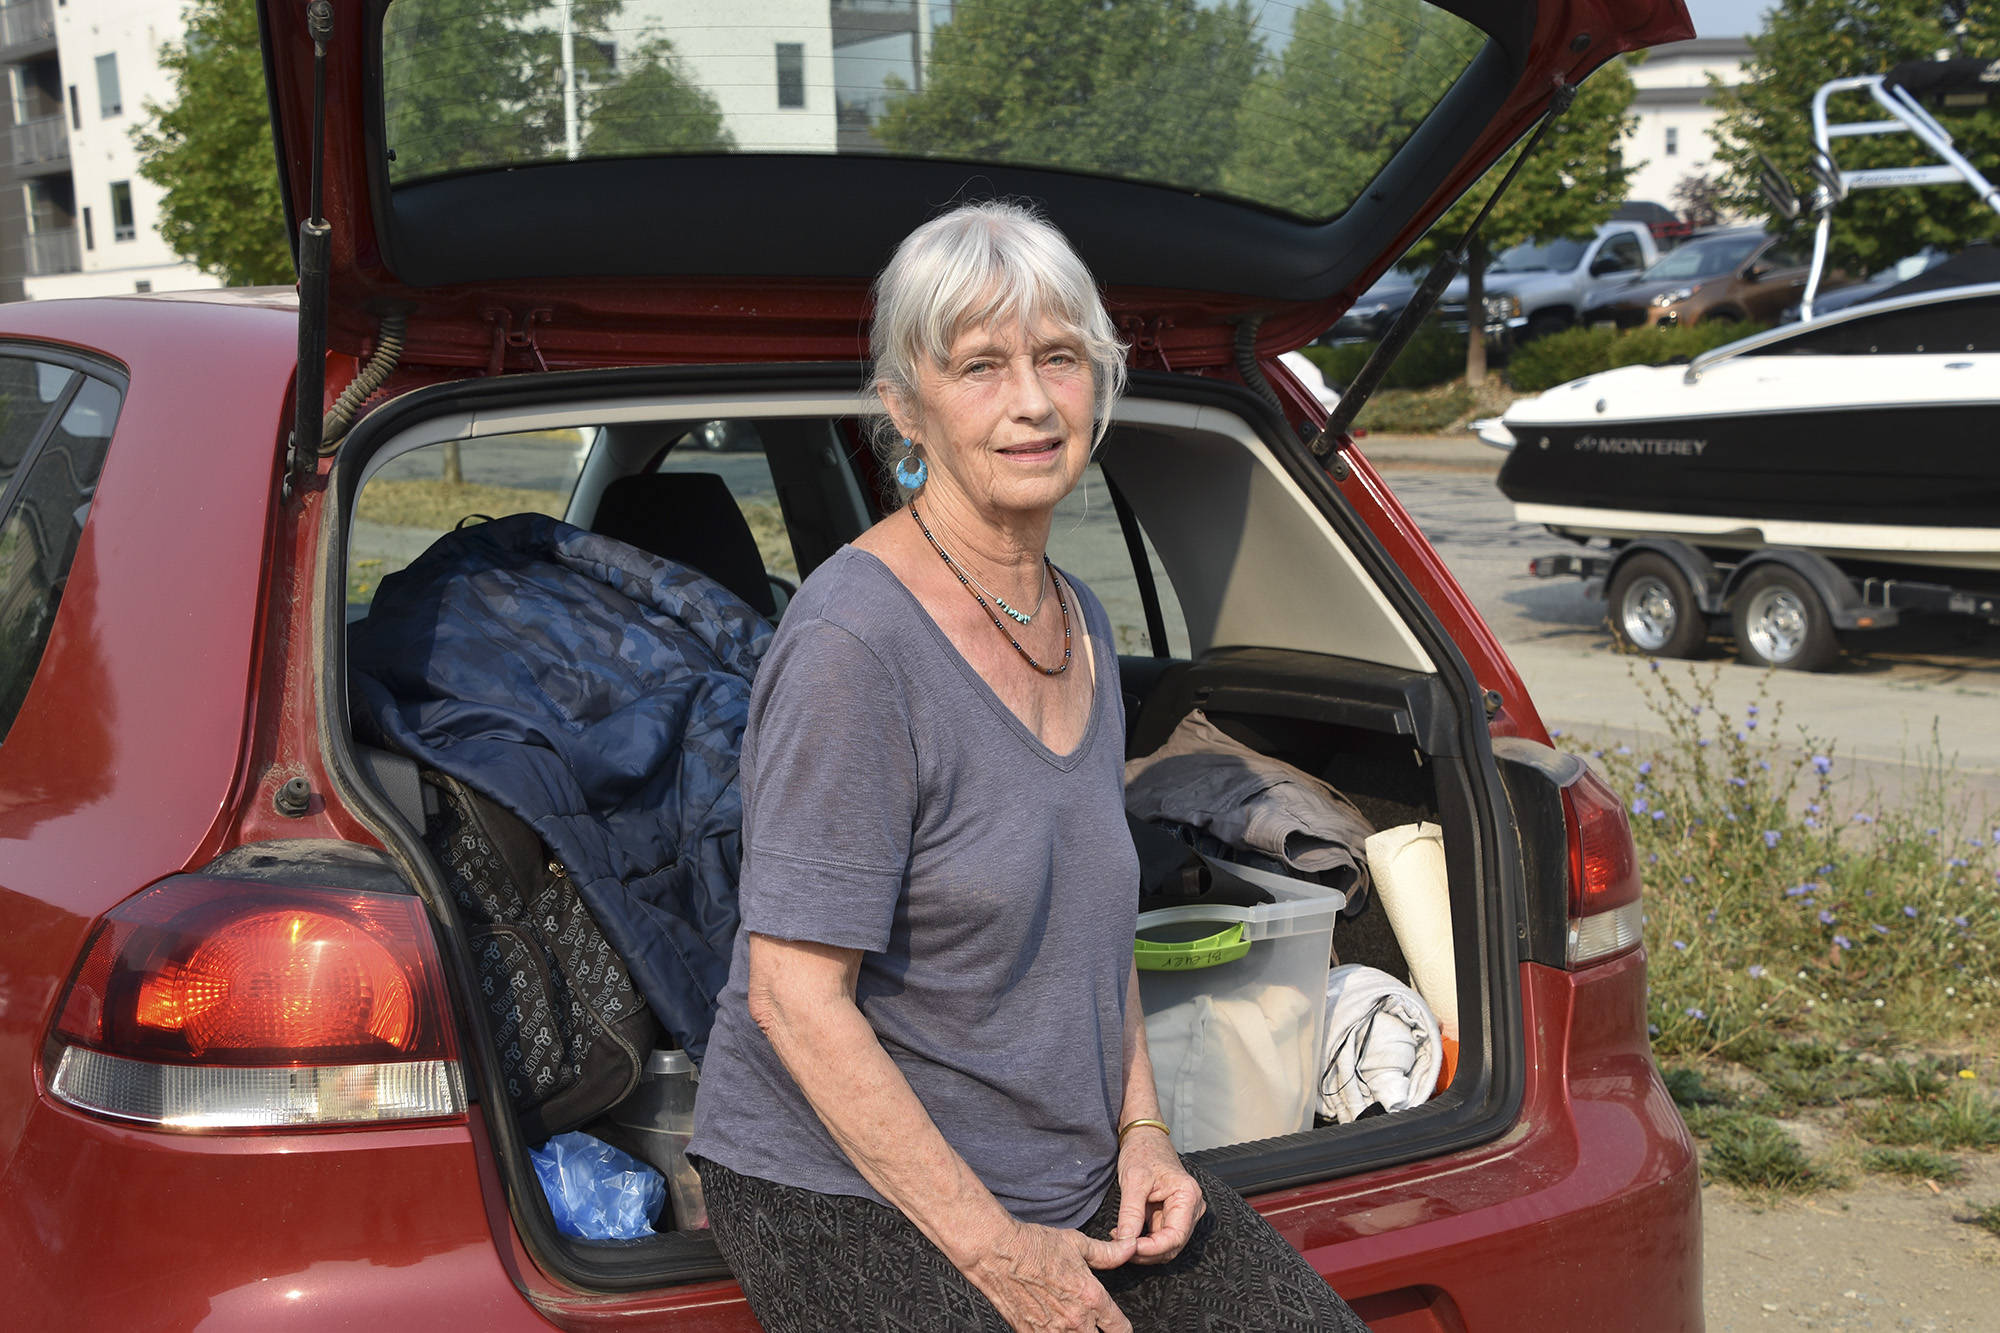 Rose Bleuer, one of the Falkland evacuees from the White Rock Lake wildfire, sits with her fully packed car on Aug. 5 outside Salmon Arms Prestige Harbourfront Resort, where the Emergency Support Services reception centre is located. (Martha Wickett - Salmon Arm Observer)